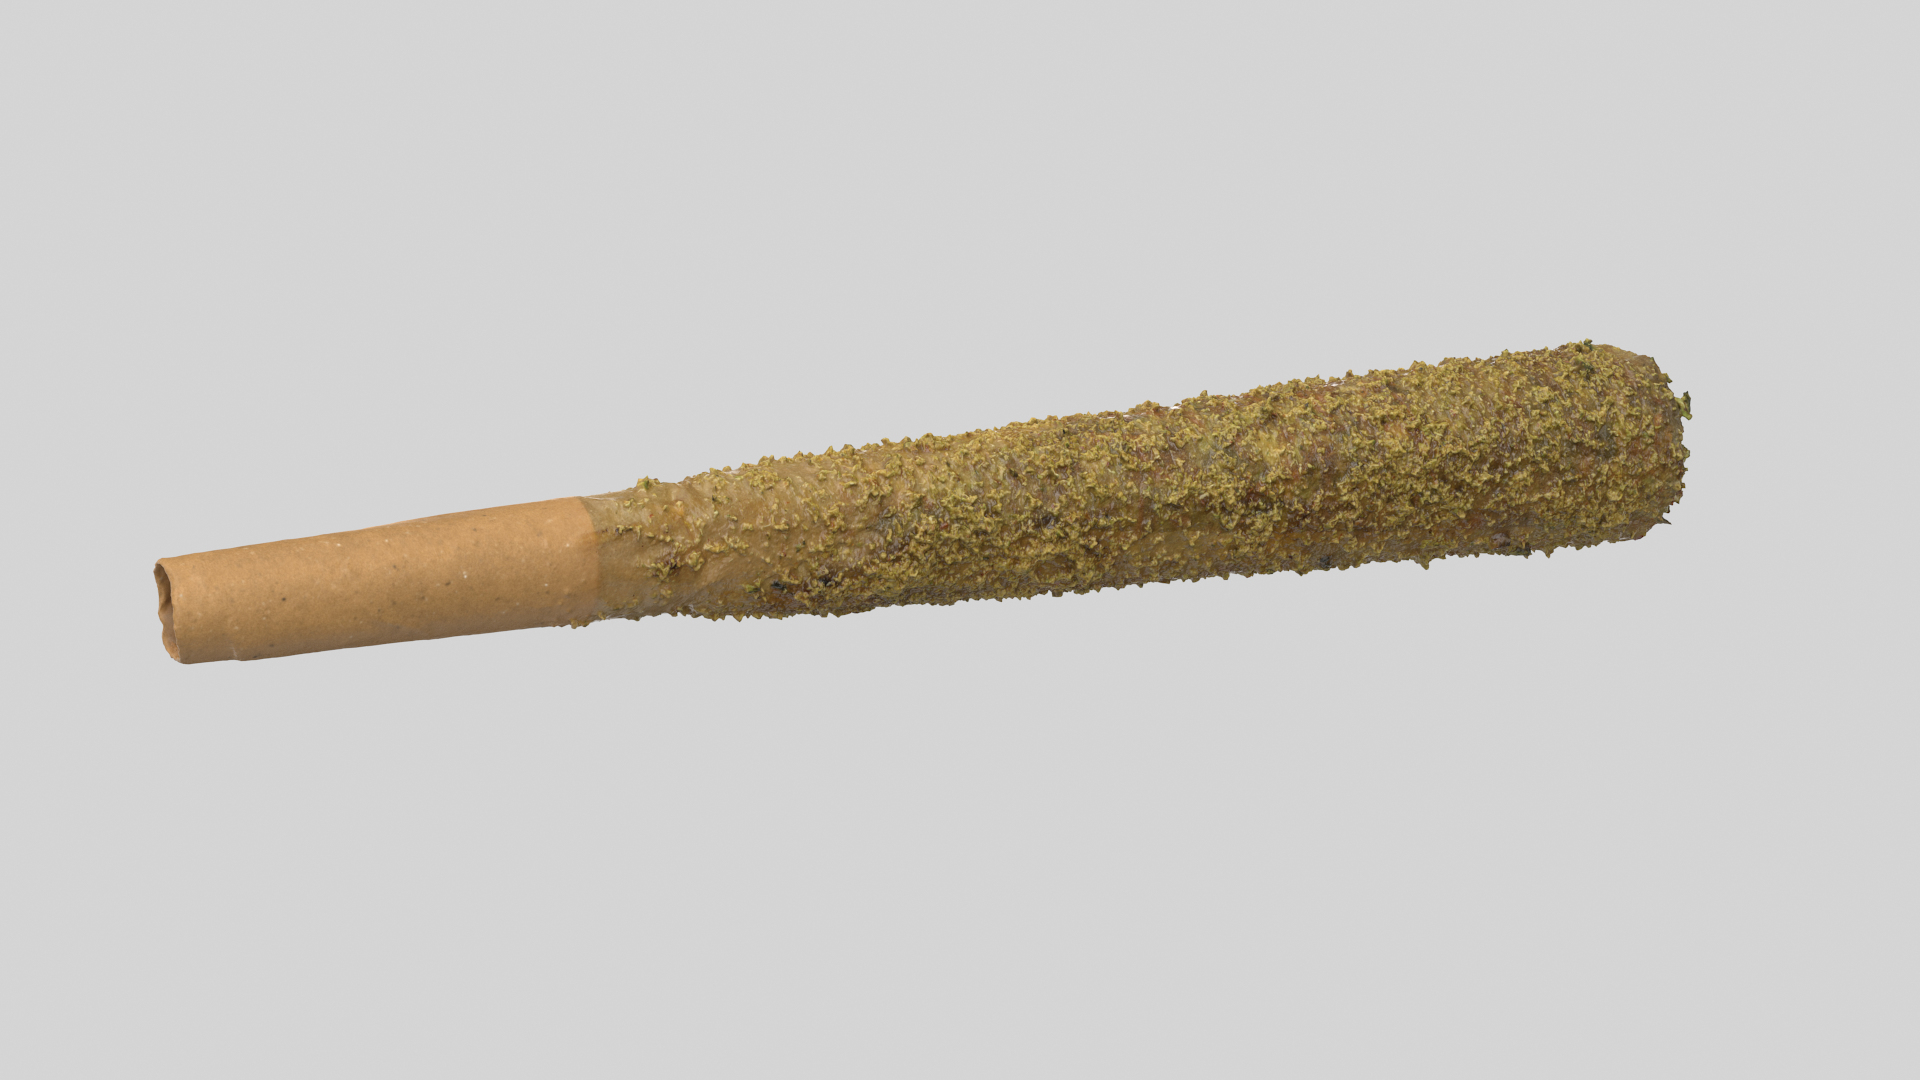 3D model Cannabis Joint Collection https://p.turbosquid.com/ts-thumb/Fa/d7HYwl/cK/joint03tt/png/1672717407/1920x1080/turn_fit_q99/ee1d7f4cec839ac34617d4feb9e72981a047053d/joint03tt-1.jpg